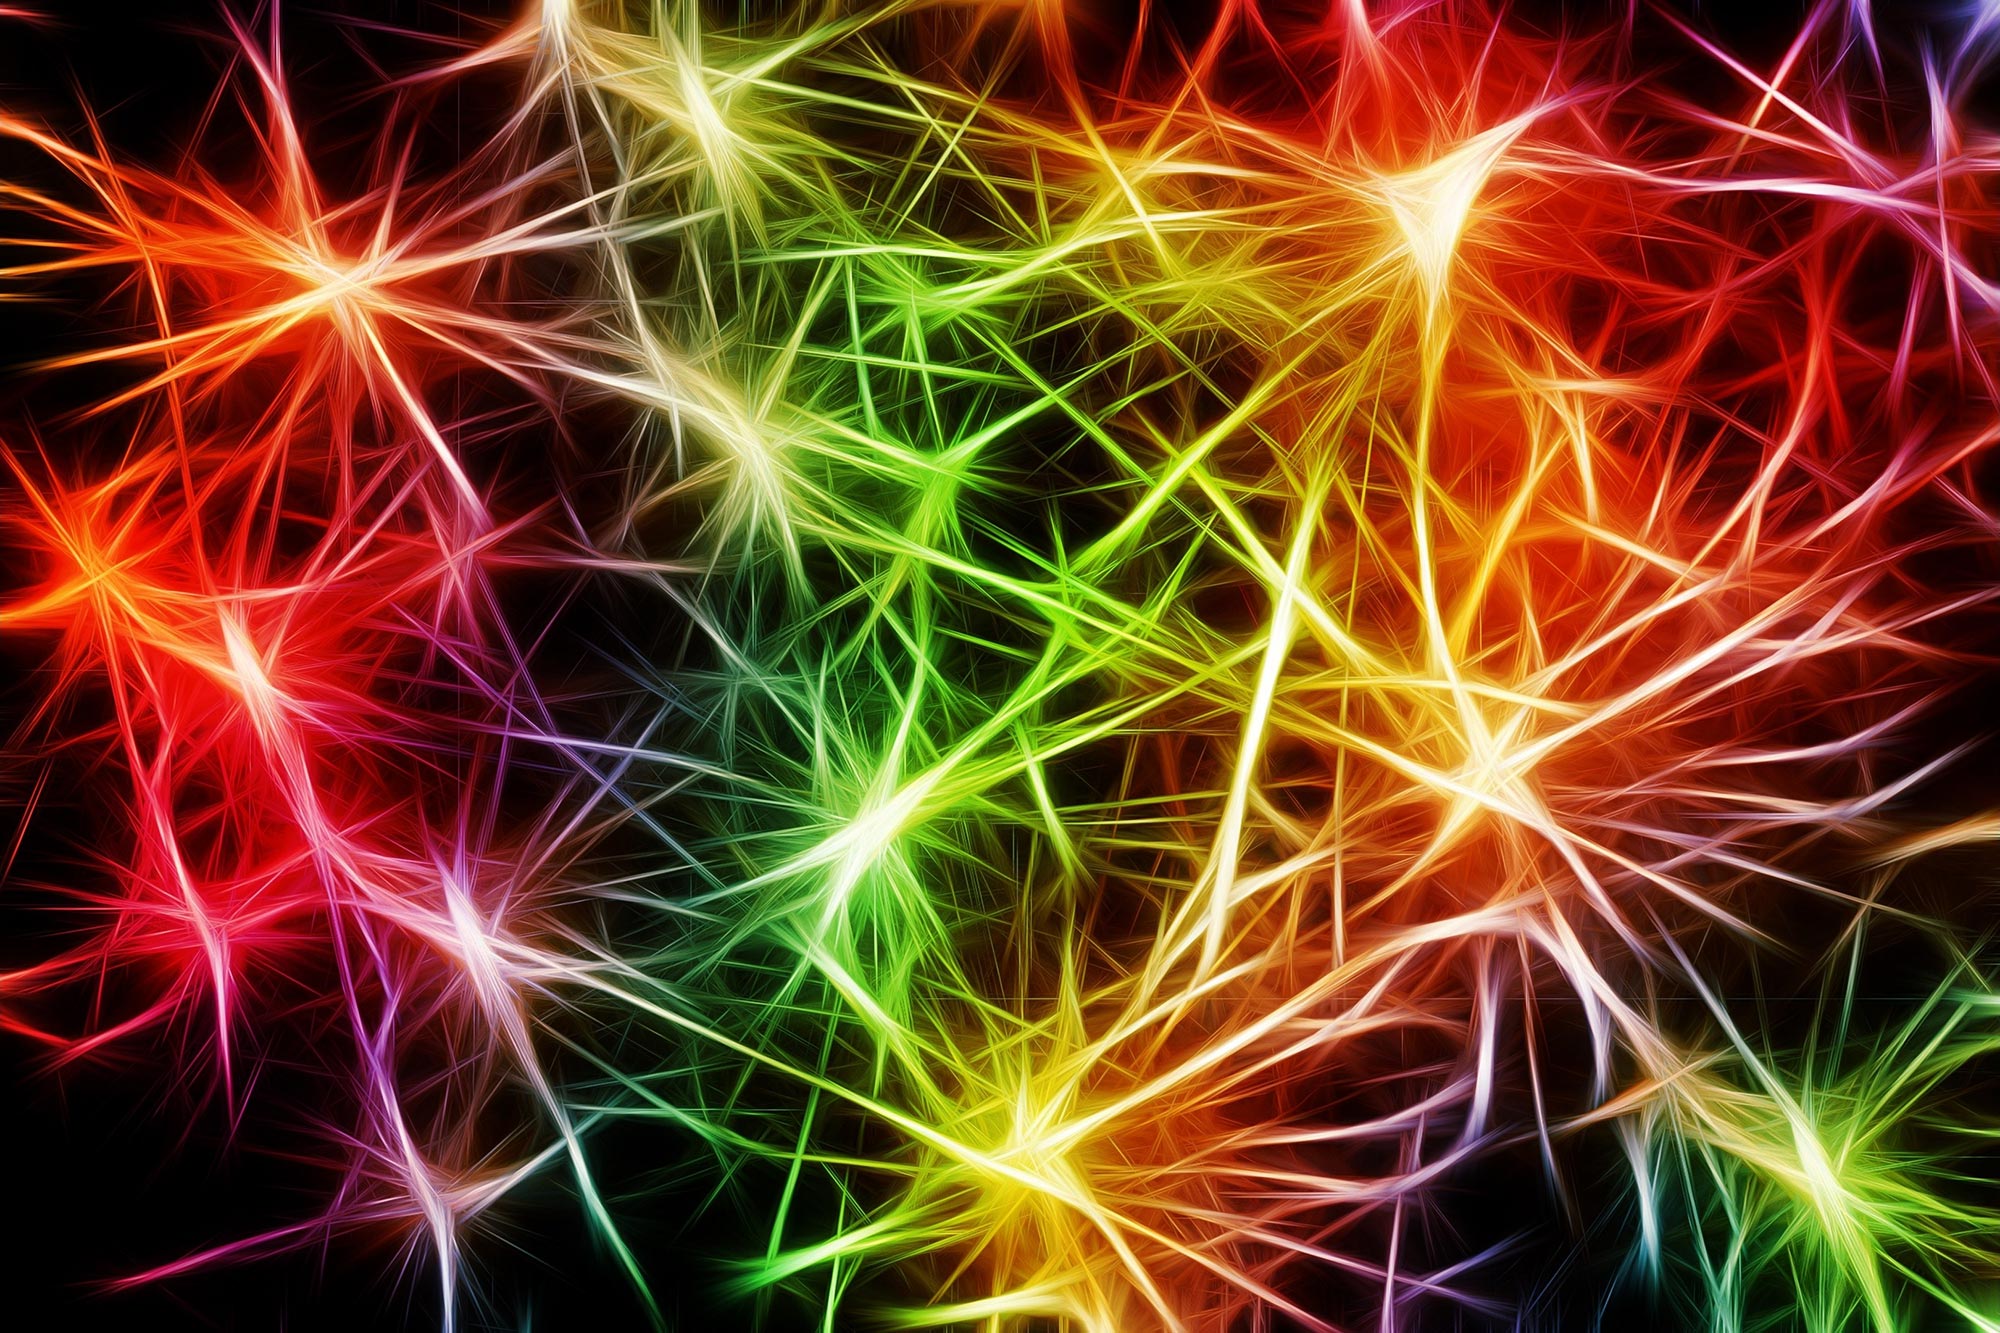 Illustration of brain activity excitable neurons